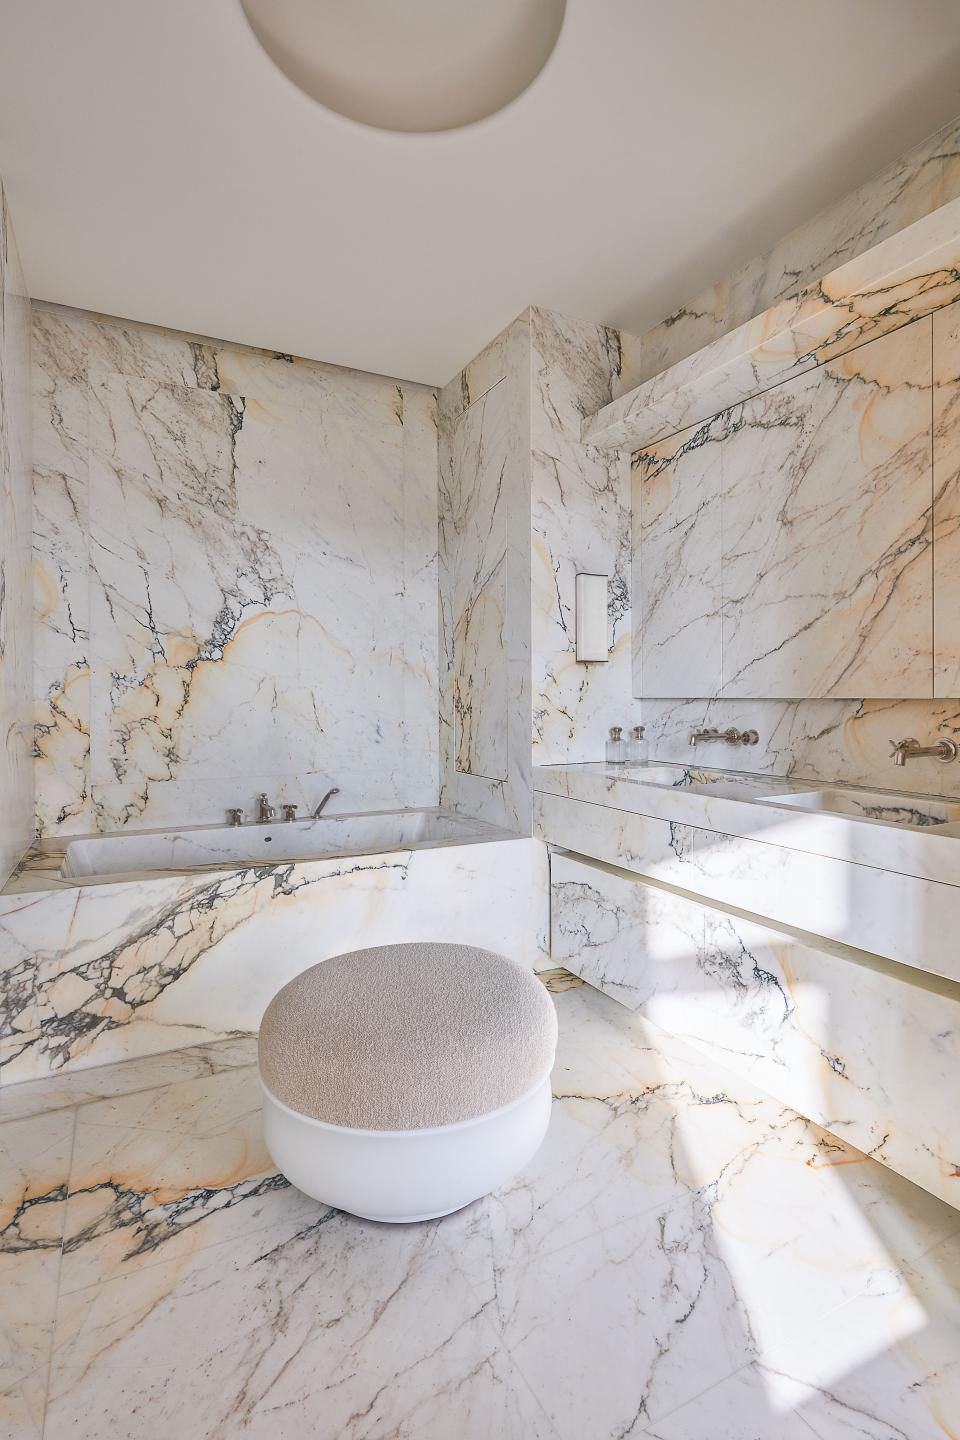 Paonazzo marble clads the bath. Eric Schmitt bronze-and-fabric pouf; Waterworks sink and tub fittings.